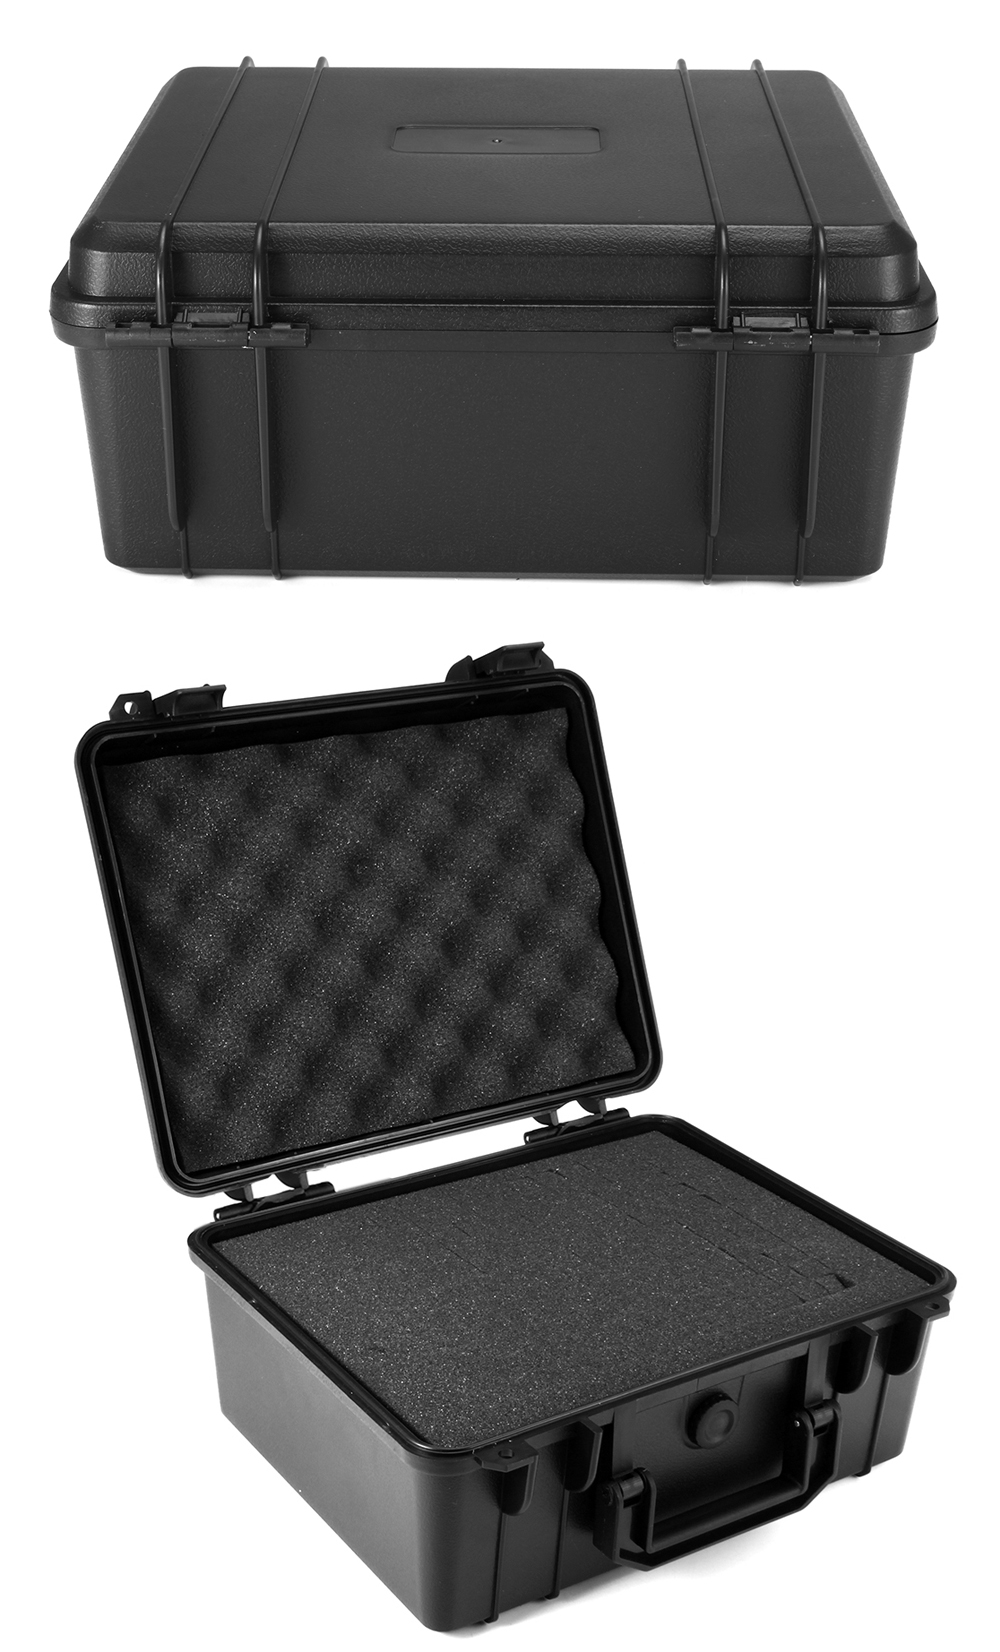 Outdoor-Portable-Waterproof-Hard-Carry-Case-Bag-Tool-Kits-Storage-Box-Safety-Protector-Organizer-1396698-2